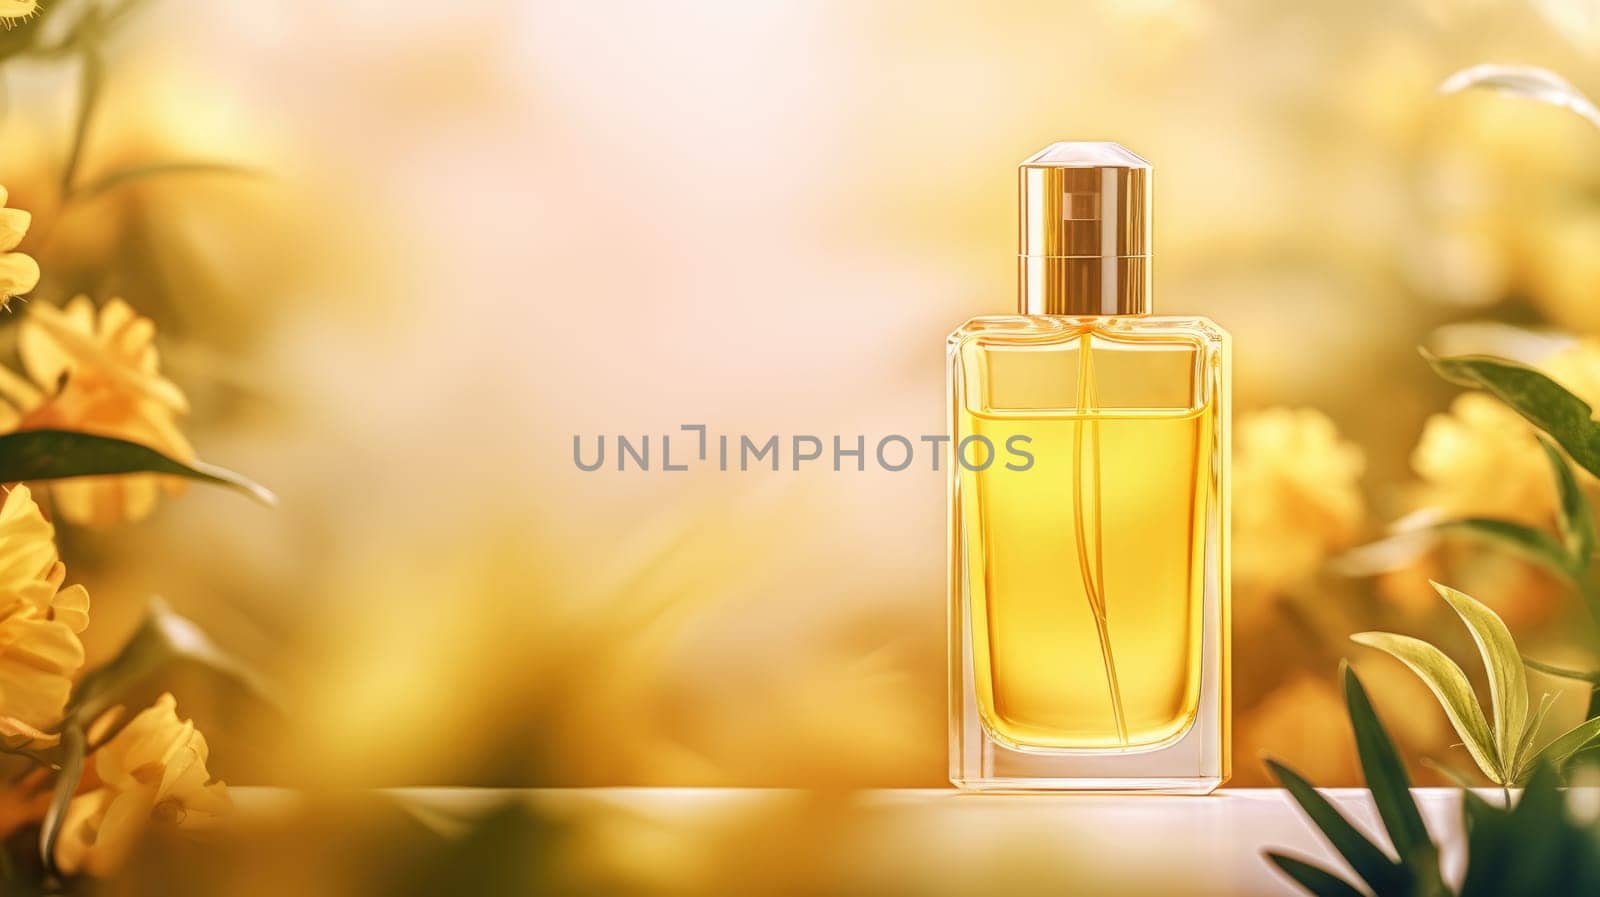 Transparent yellow glass perfume bottle mockup with plants on background. Eau de toilette. Mockup, spring flat lay. by JuliaDorian